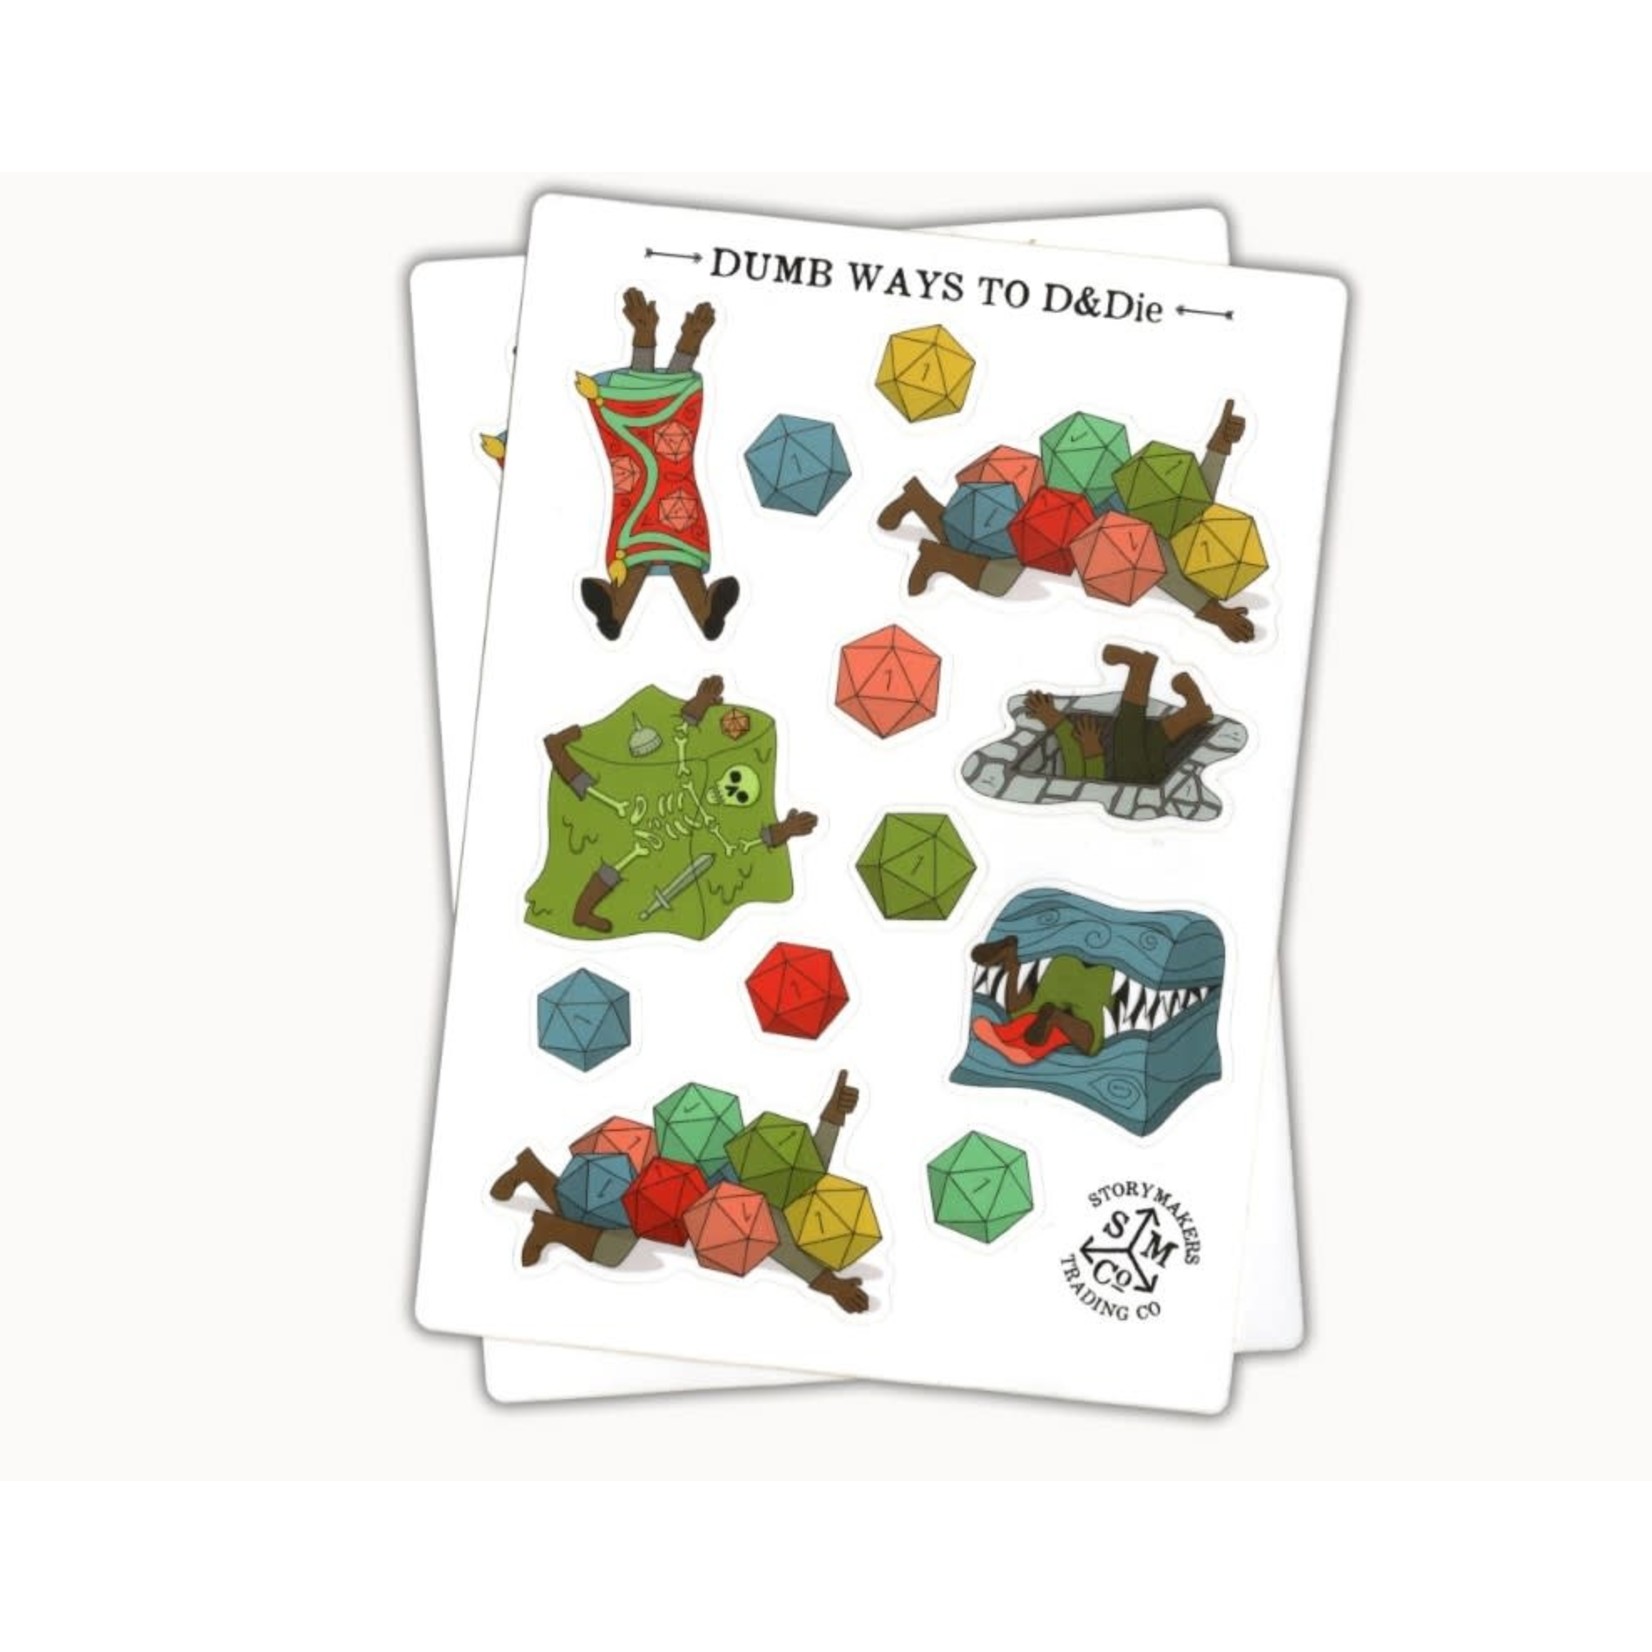 Storymakers Trading Co Vinyl Sticker: Dumb Ways to D&Die 5"x7" Sheet